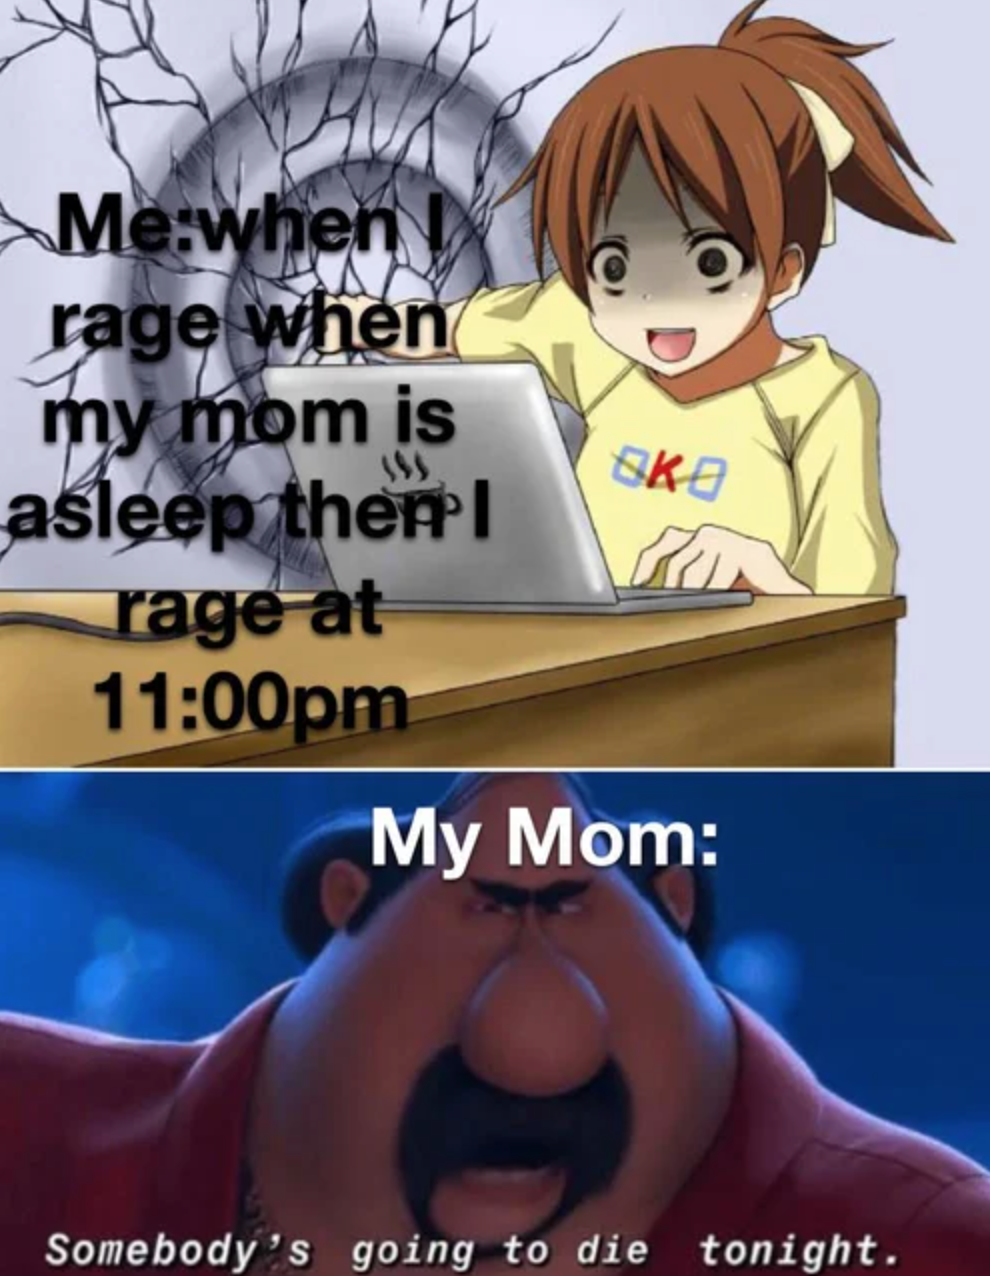 cliffhanger anime meme - eka Mewhen rage when my mom is asleep therl rage at pm My Mom Somebody's going to die tonight.